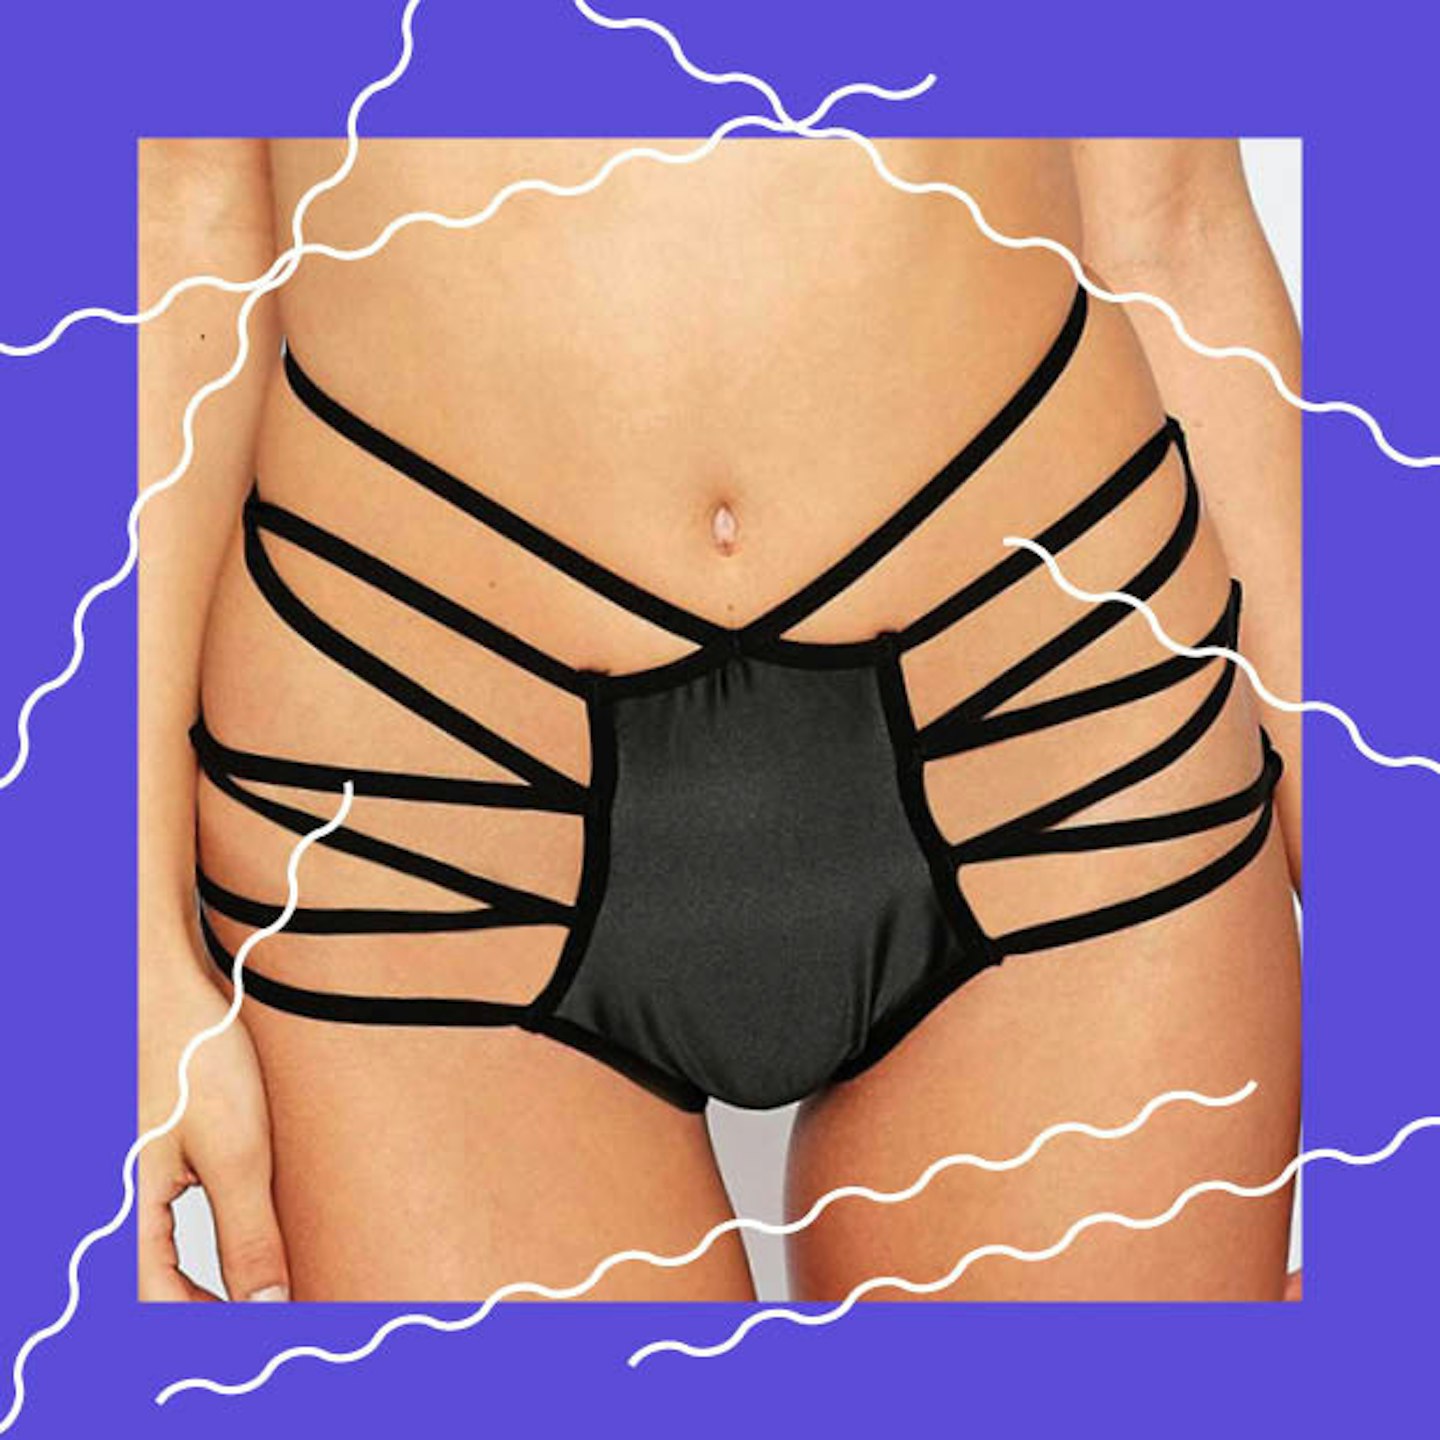 5 Very Pretty Underwear Concepts That Are A Nightmare IRL